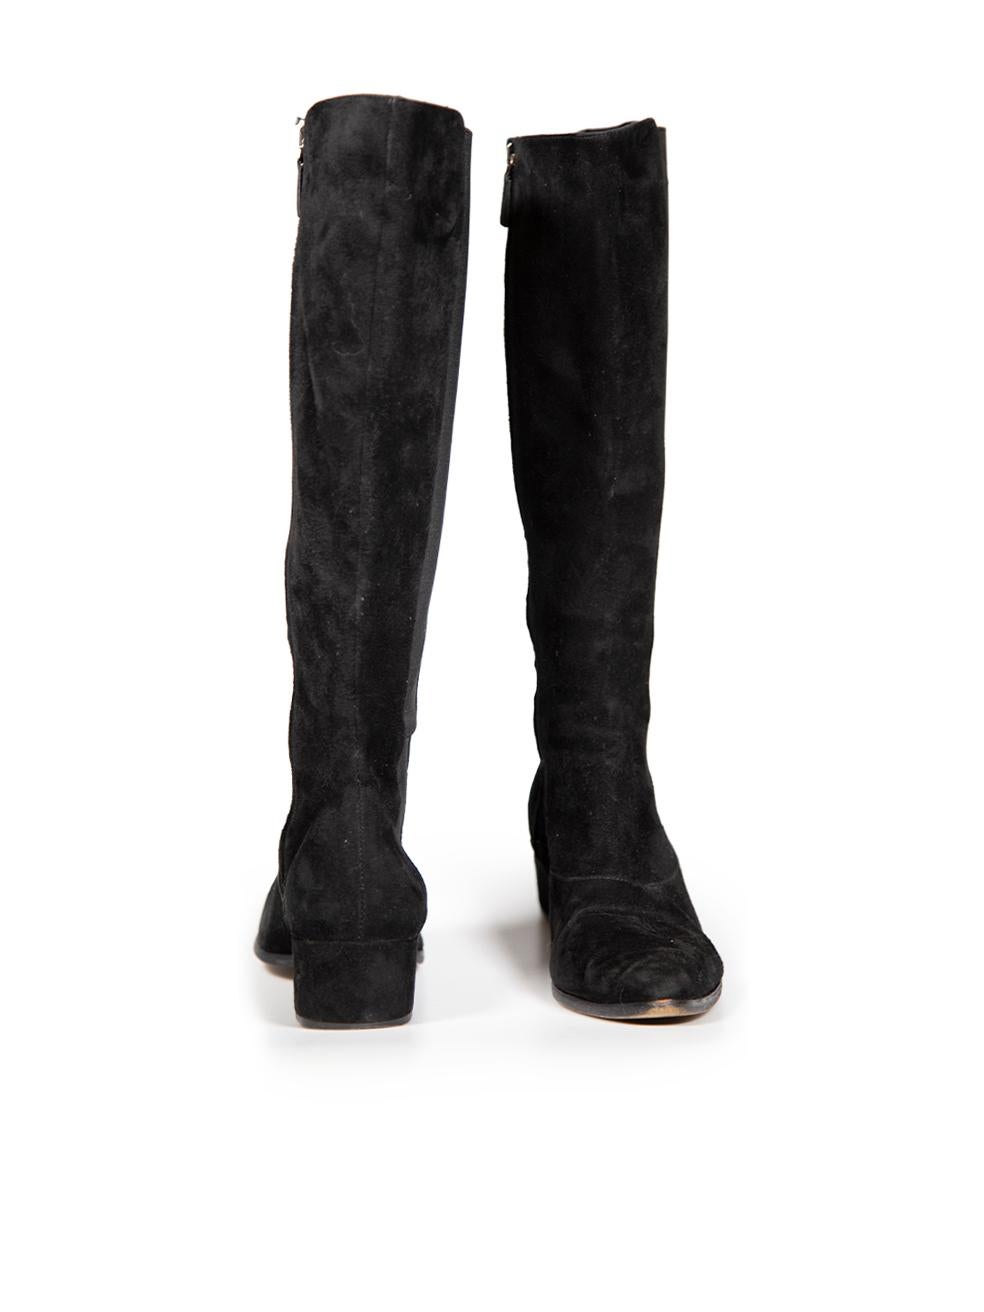 Prada Black Suede Pointed Knee High Boots Size IT 39 In Good Condition For Sale In London, GB